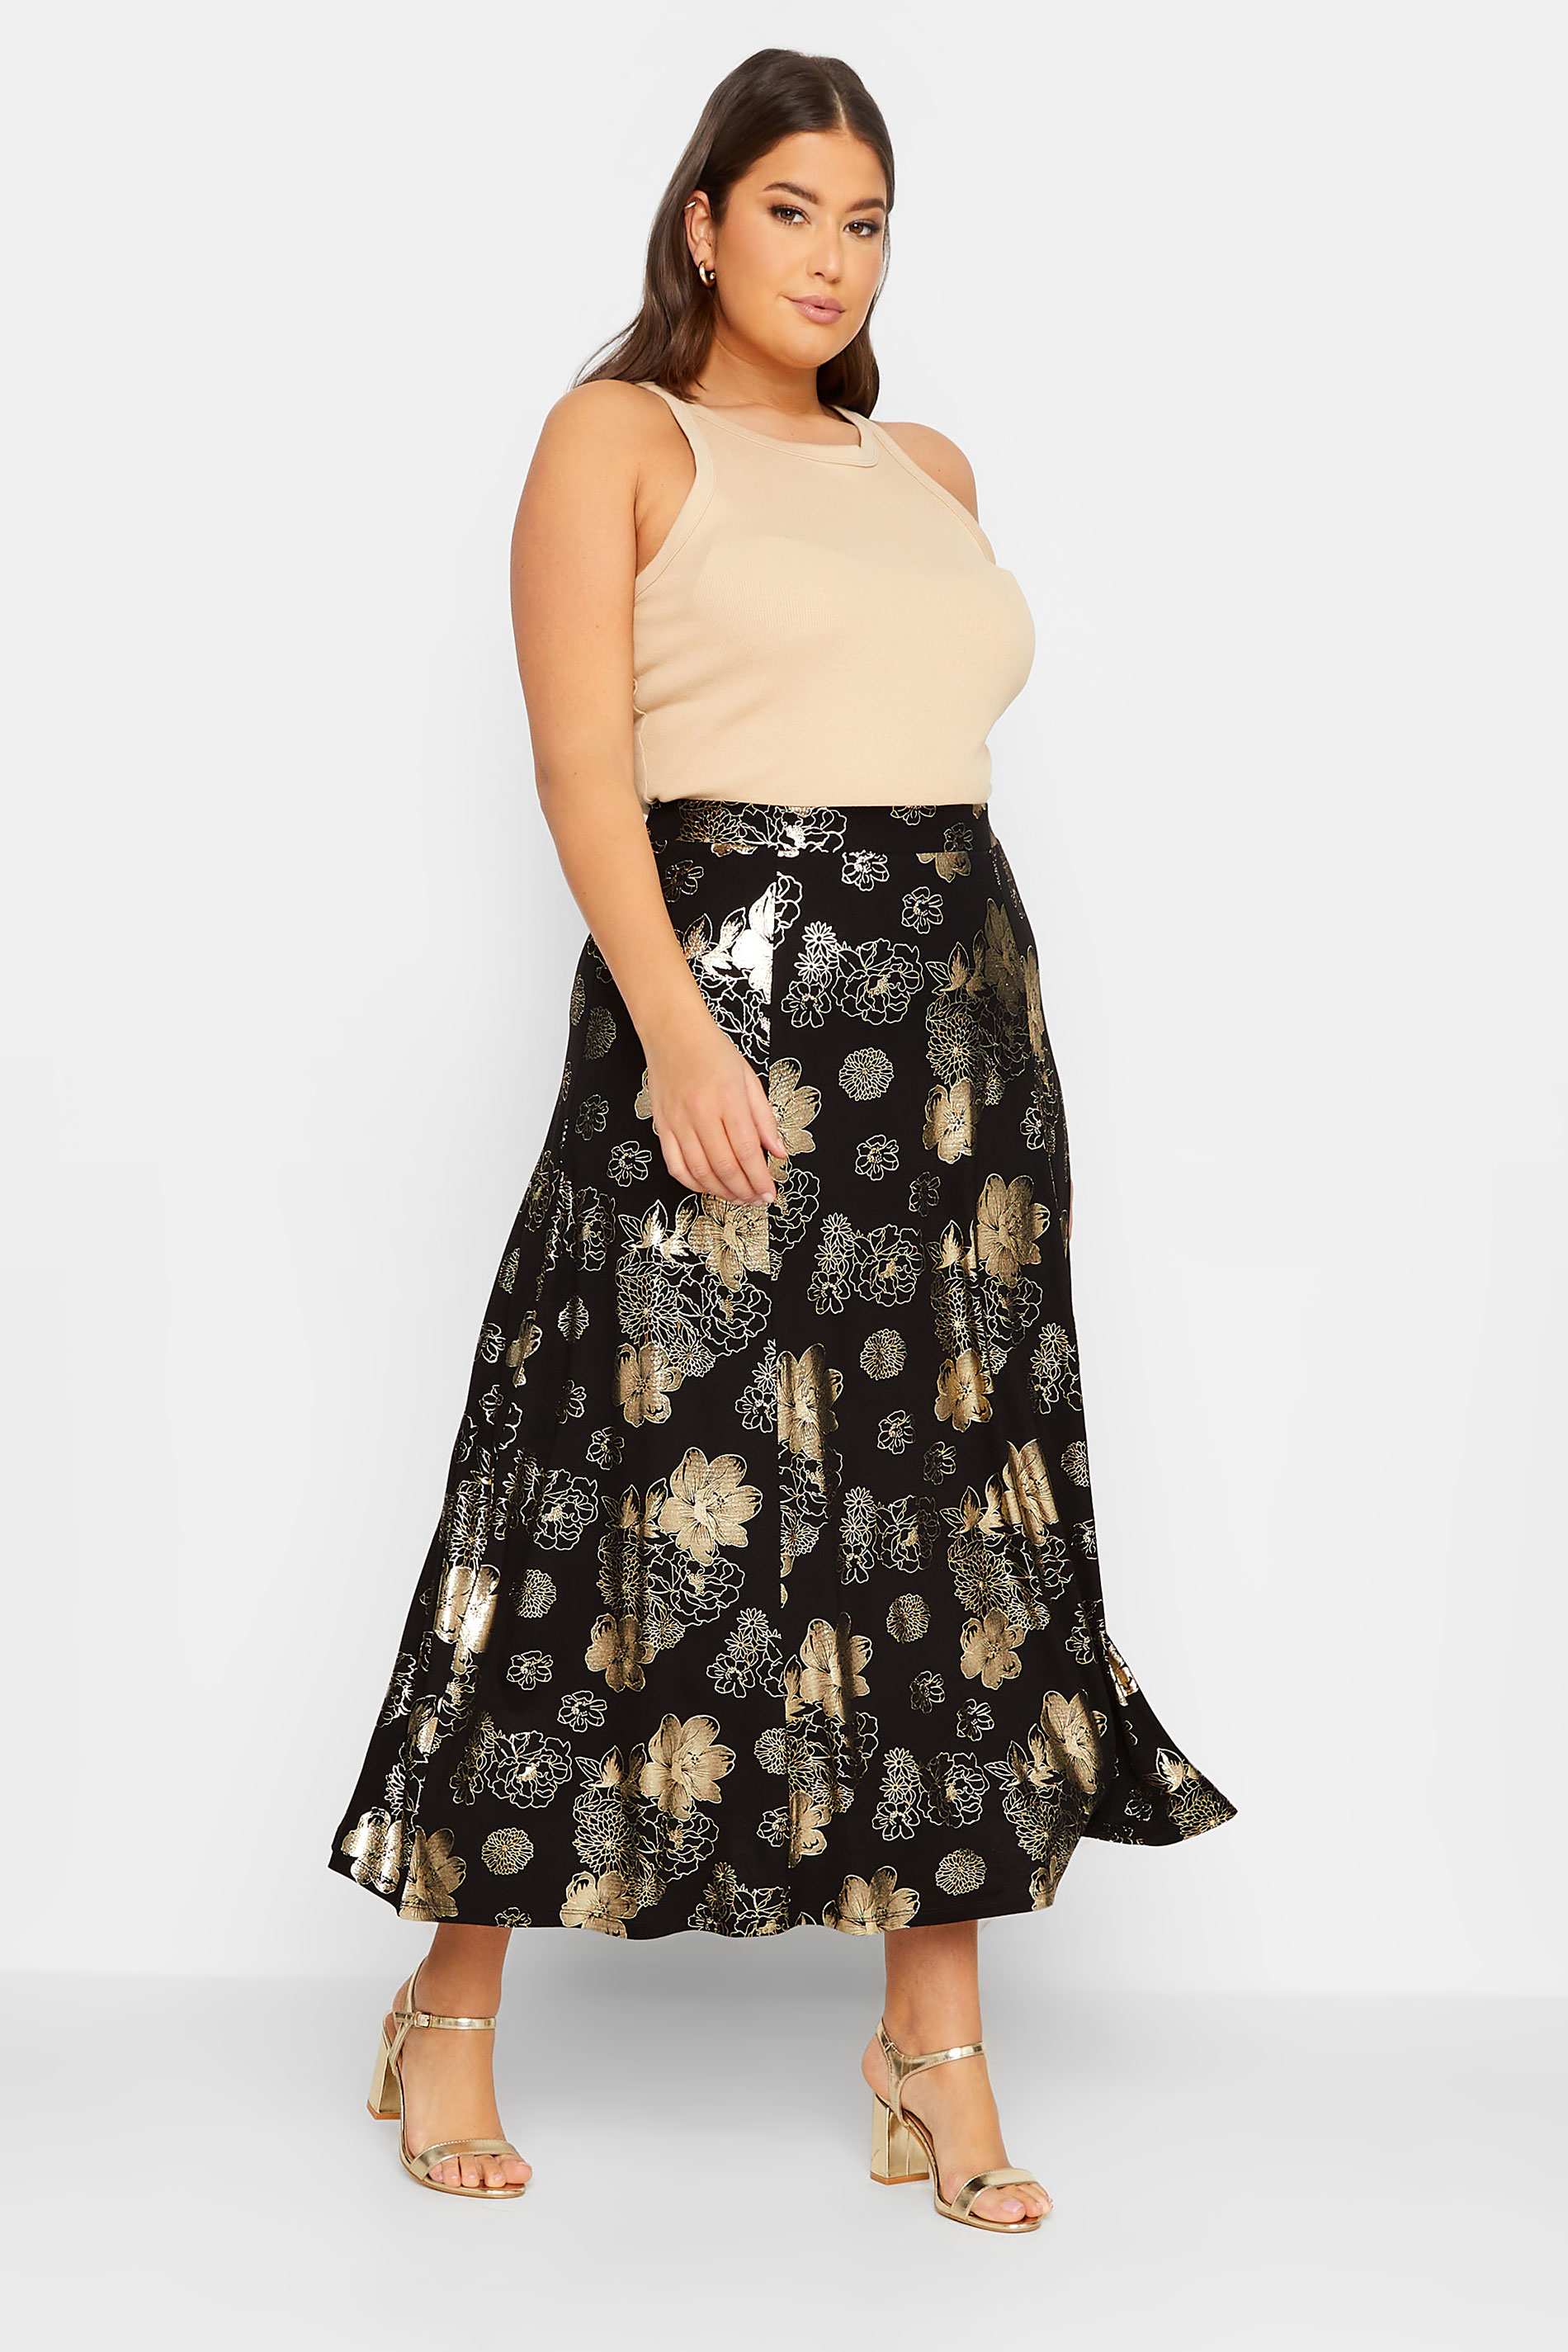 YOURS LUXURY Plus Size Black Floral Foil Printed Skirt | Yours Clothing 2